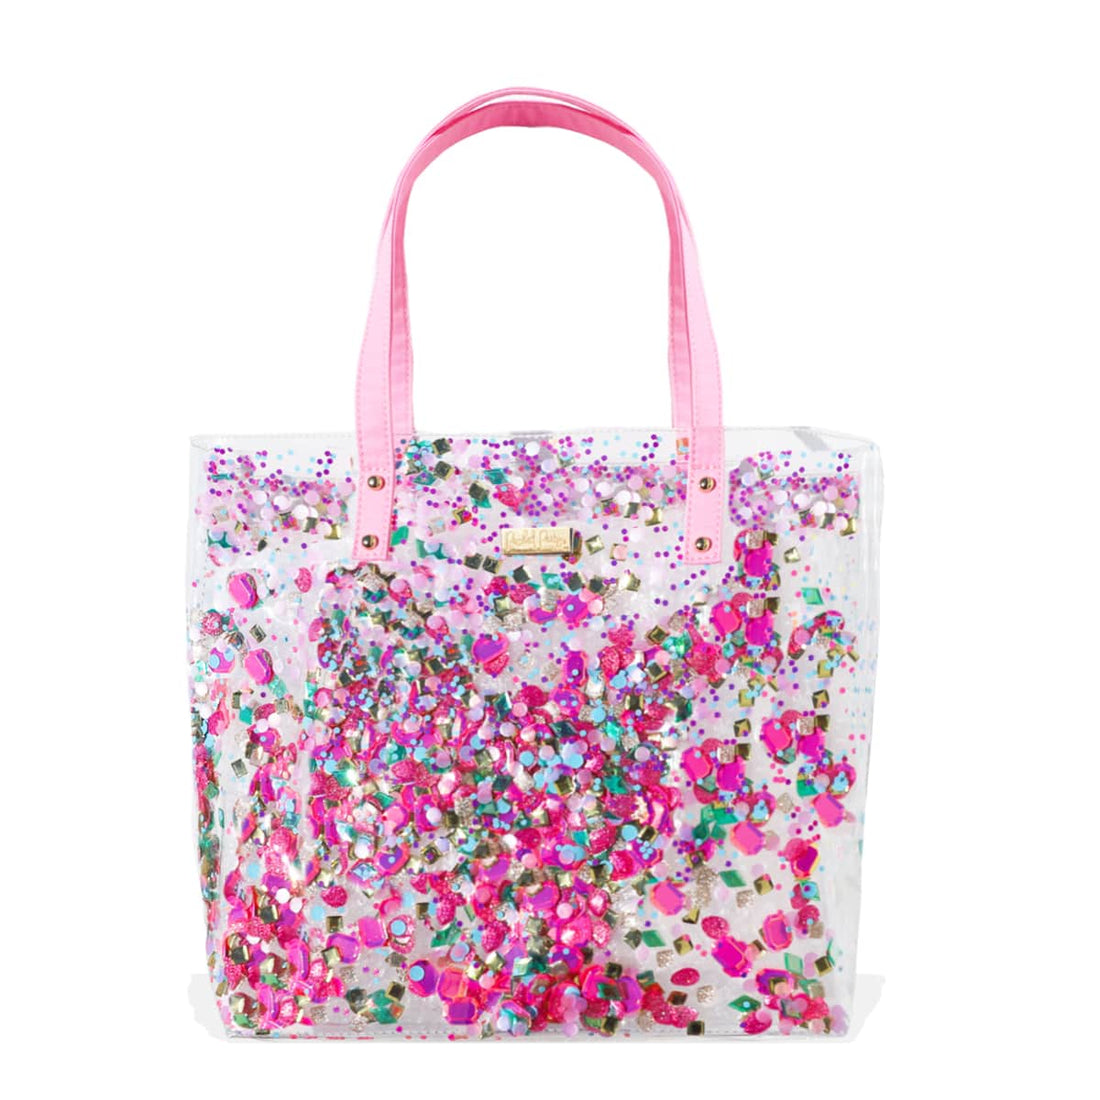 Shop Packed Party Be A Gem Mini Tote Bag - Premium Tote Bag from Packed Party Online now at Spoiled Brat 